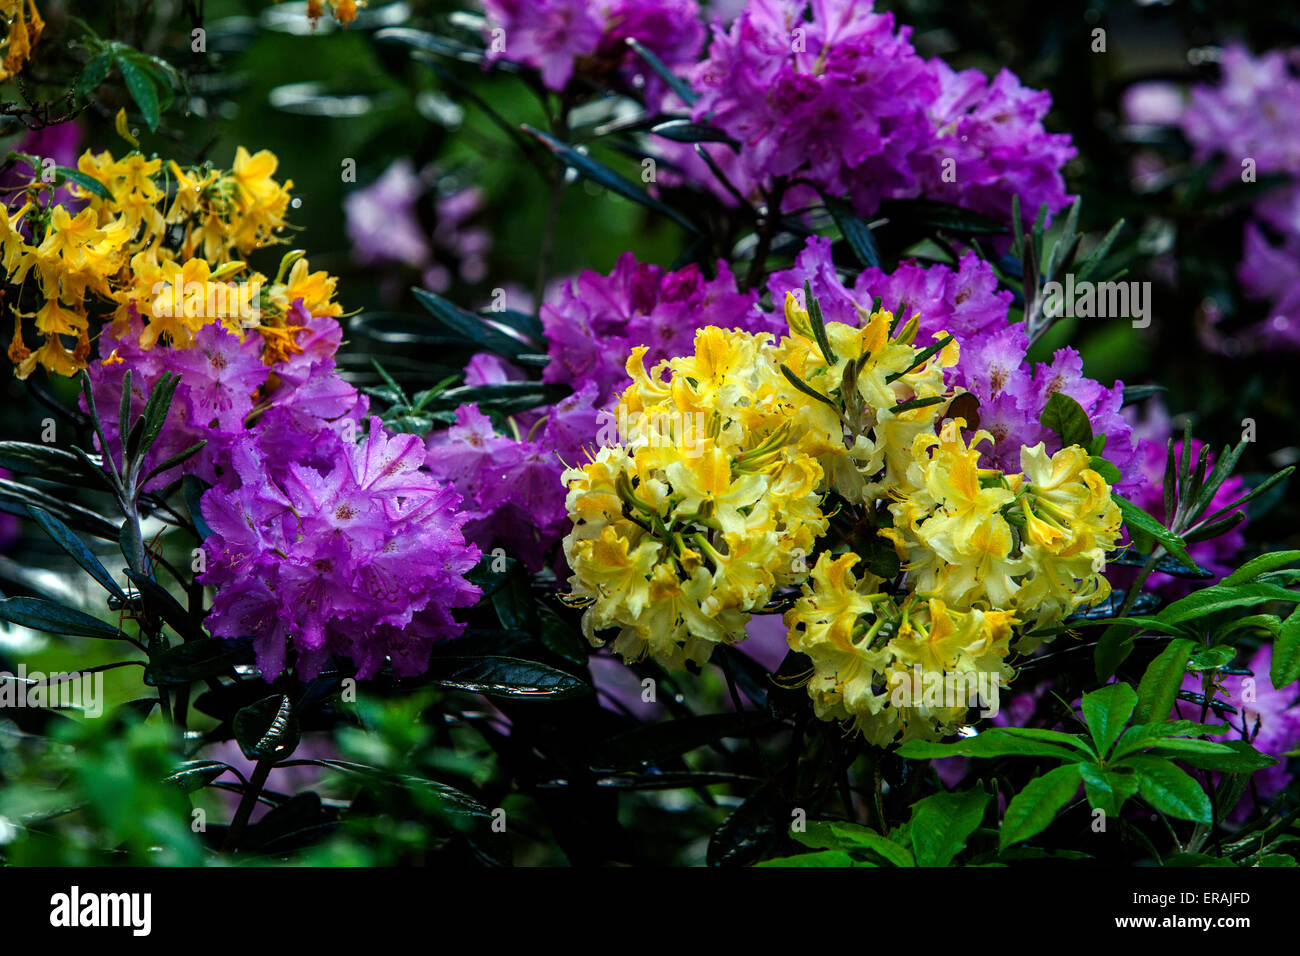 Blue Rhododendrons in bloom,garden flowers Stock Photo